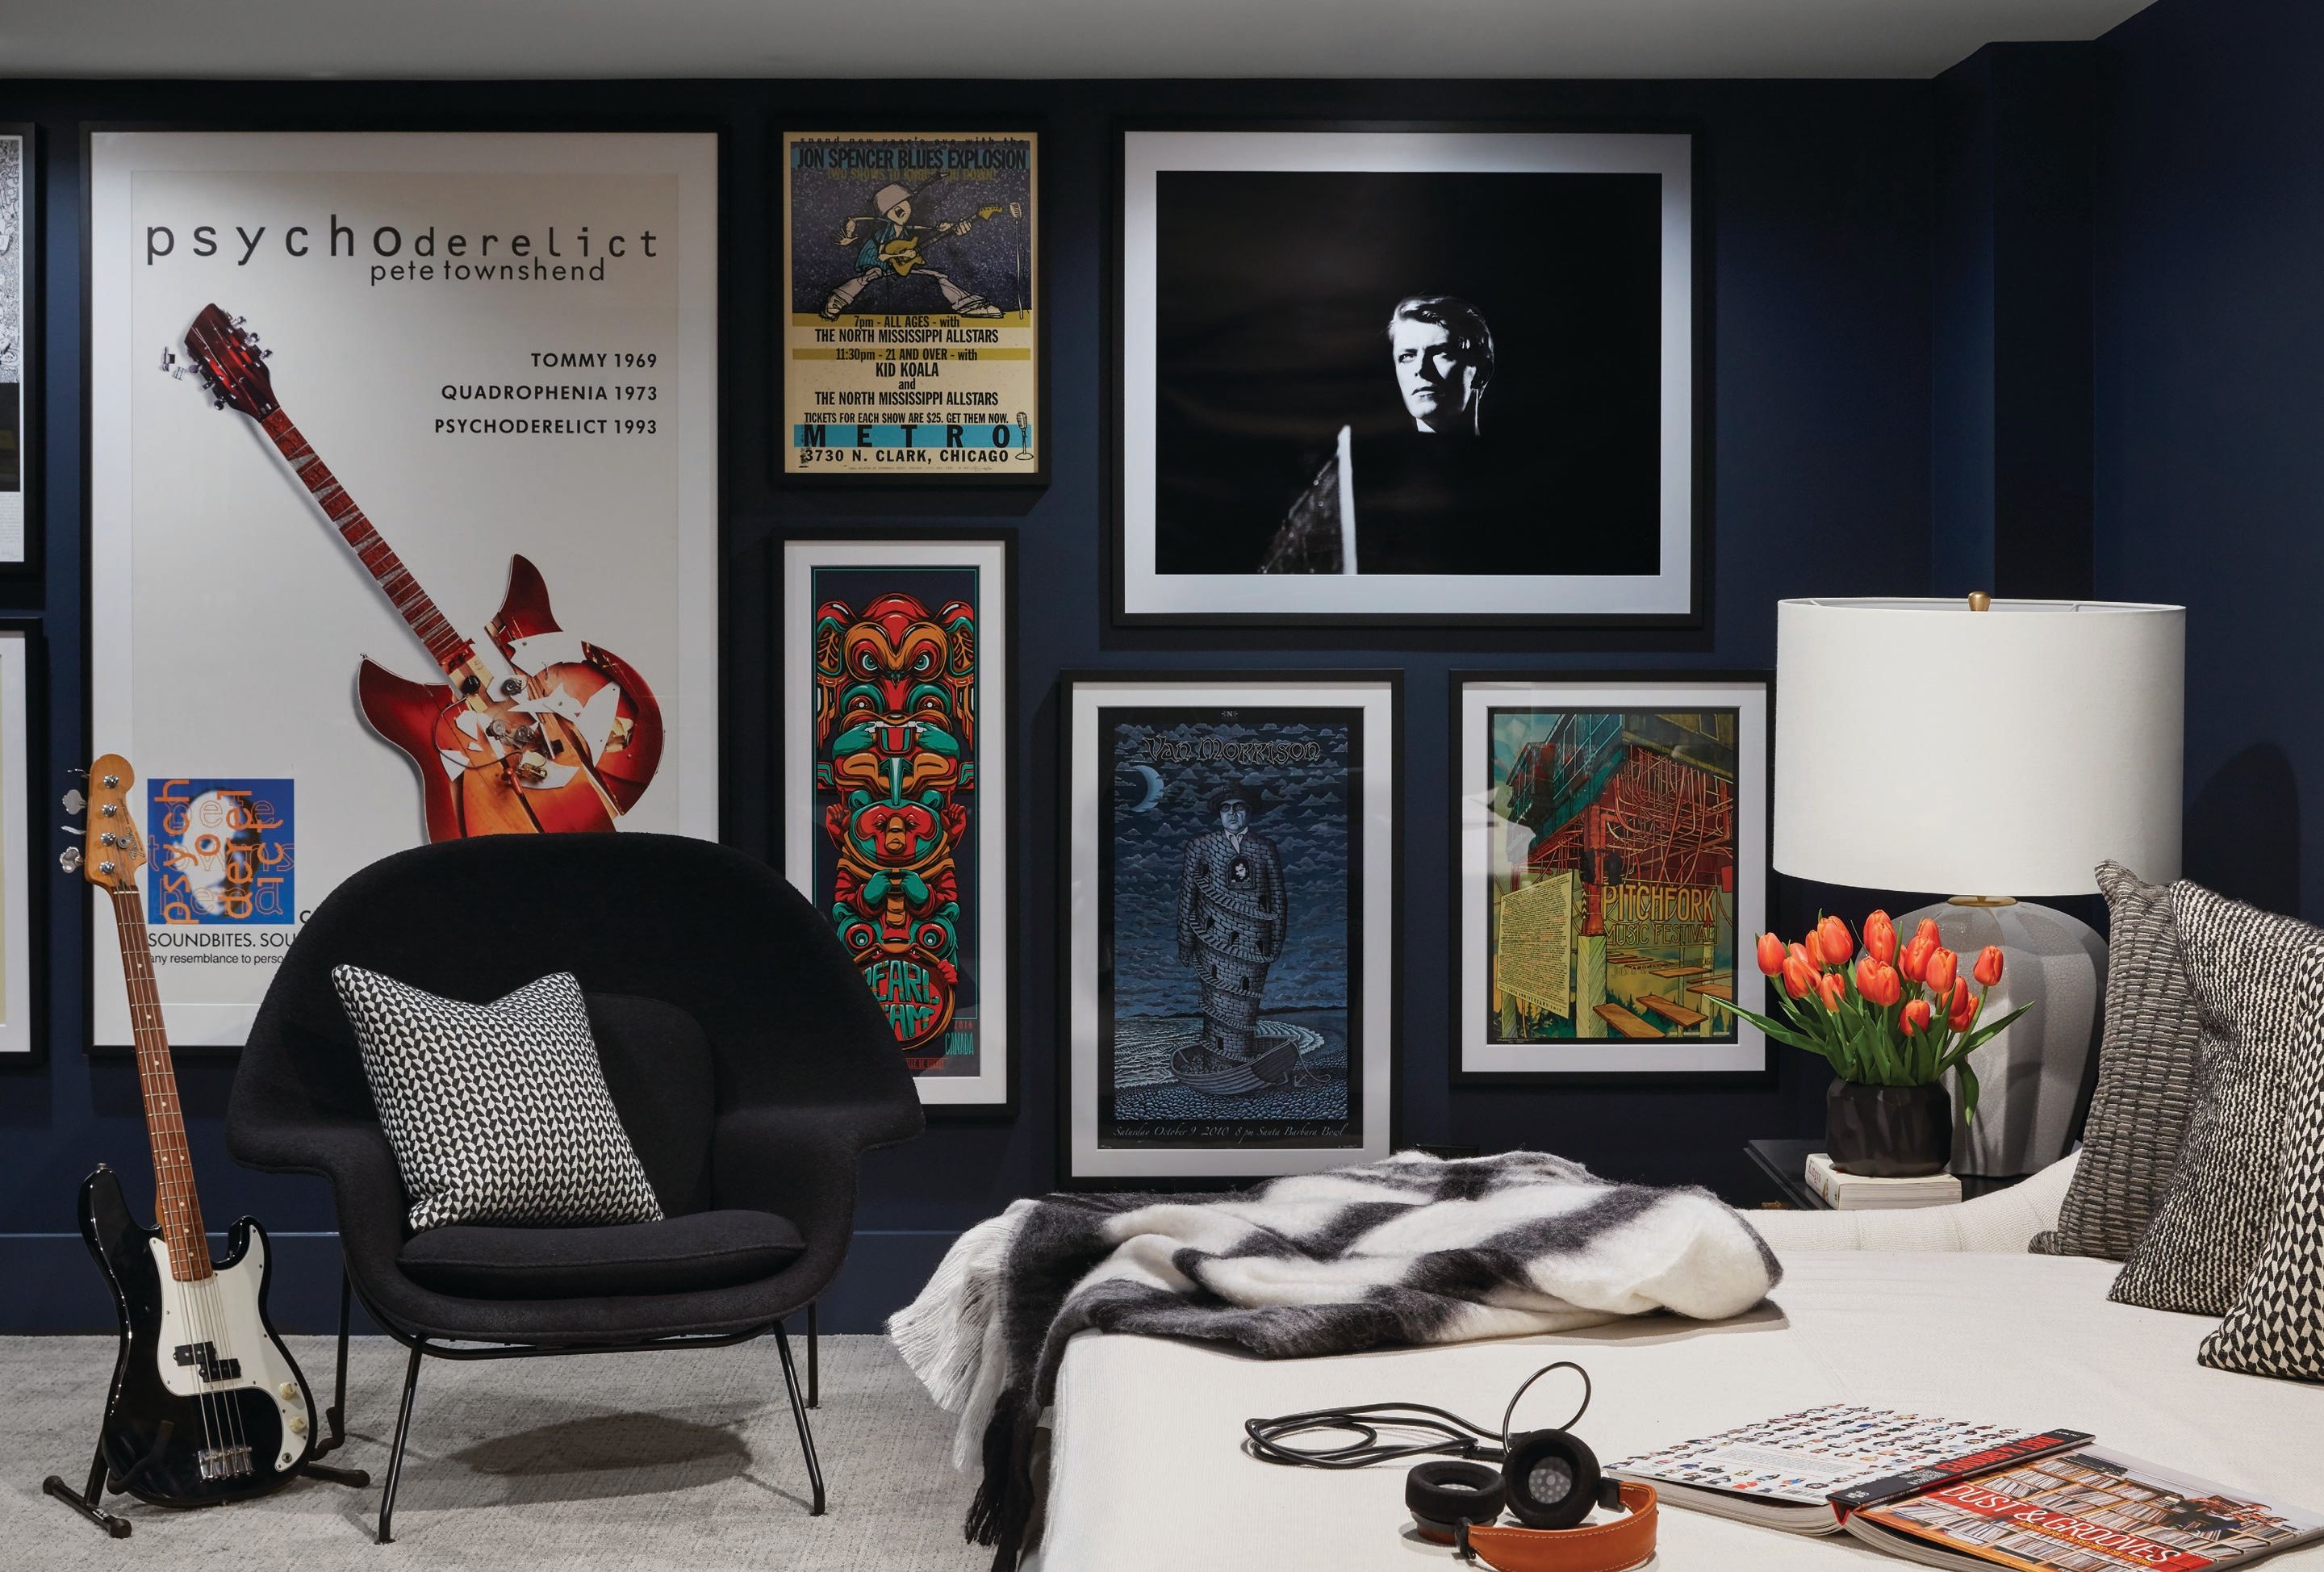 From concert posters to fine photography, the clients’ expansive art collection takes center stage throughout the abode PHOTOGRAPHED BY DUSTIN HALLECK